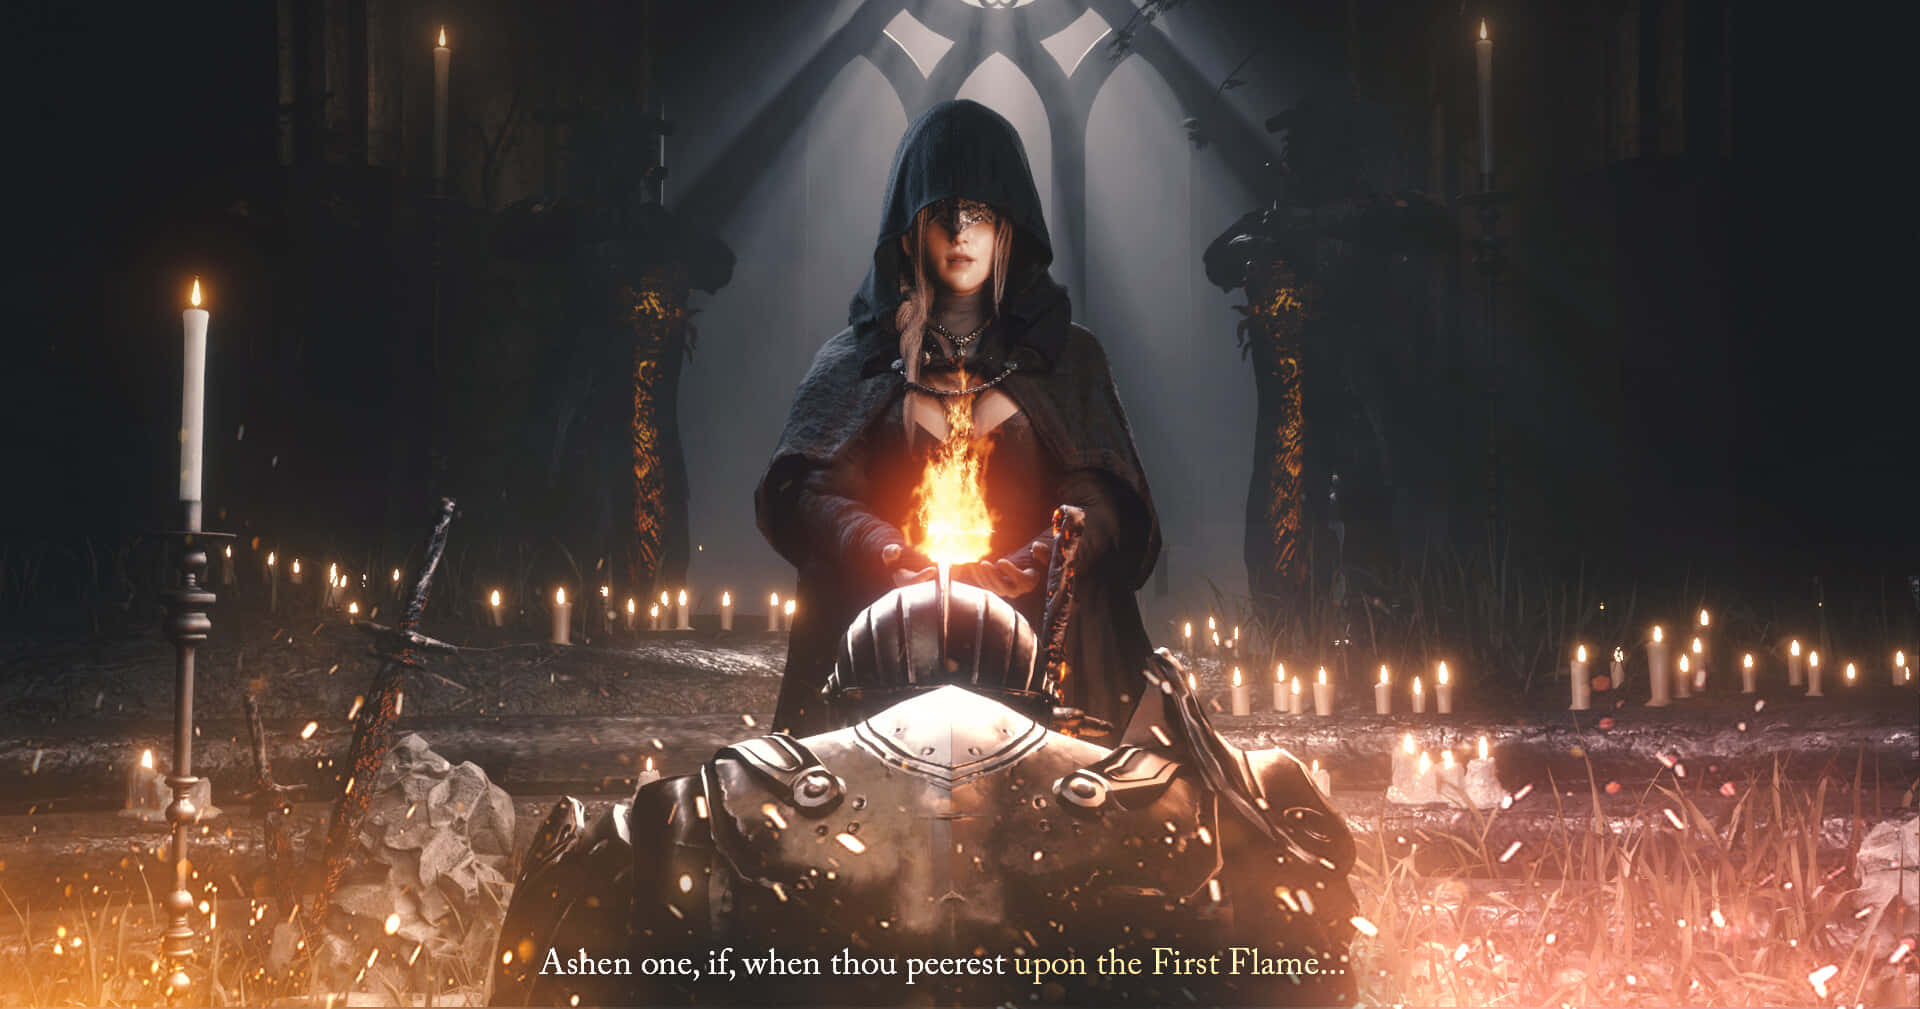 Enigmatic Fire Keeper standing in the dark with glowing eyes Wallpaper